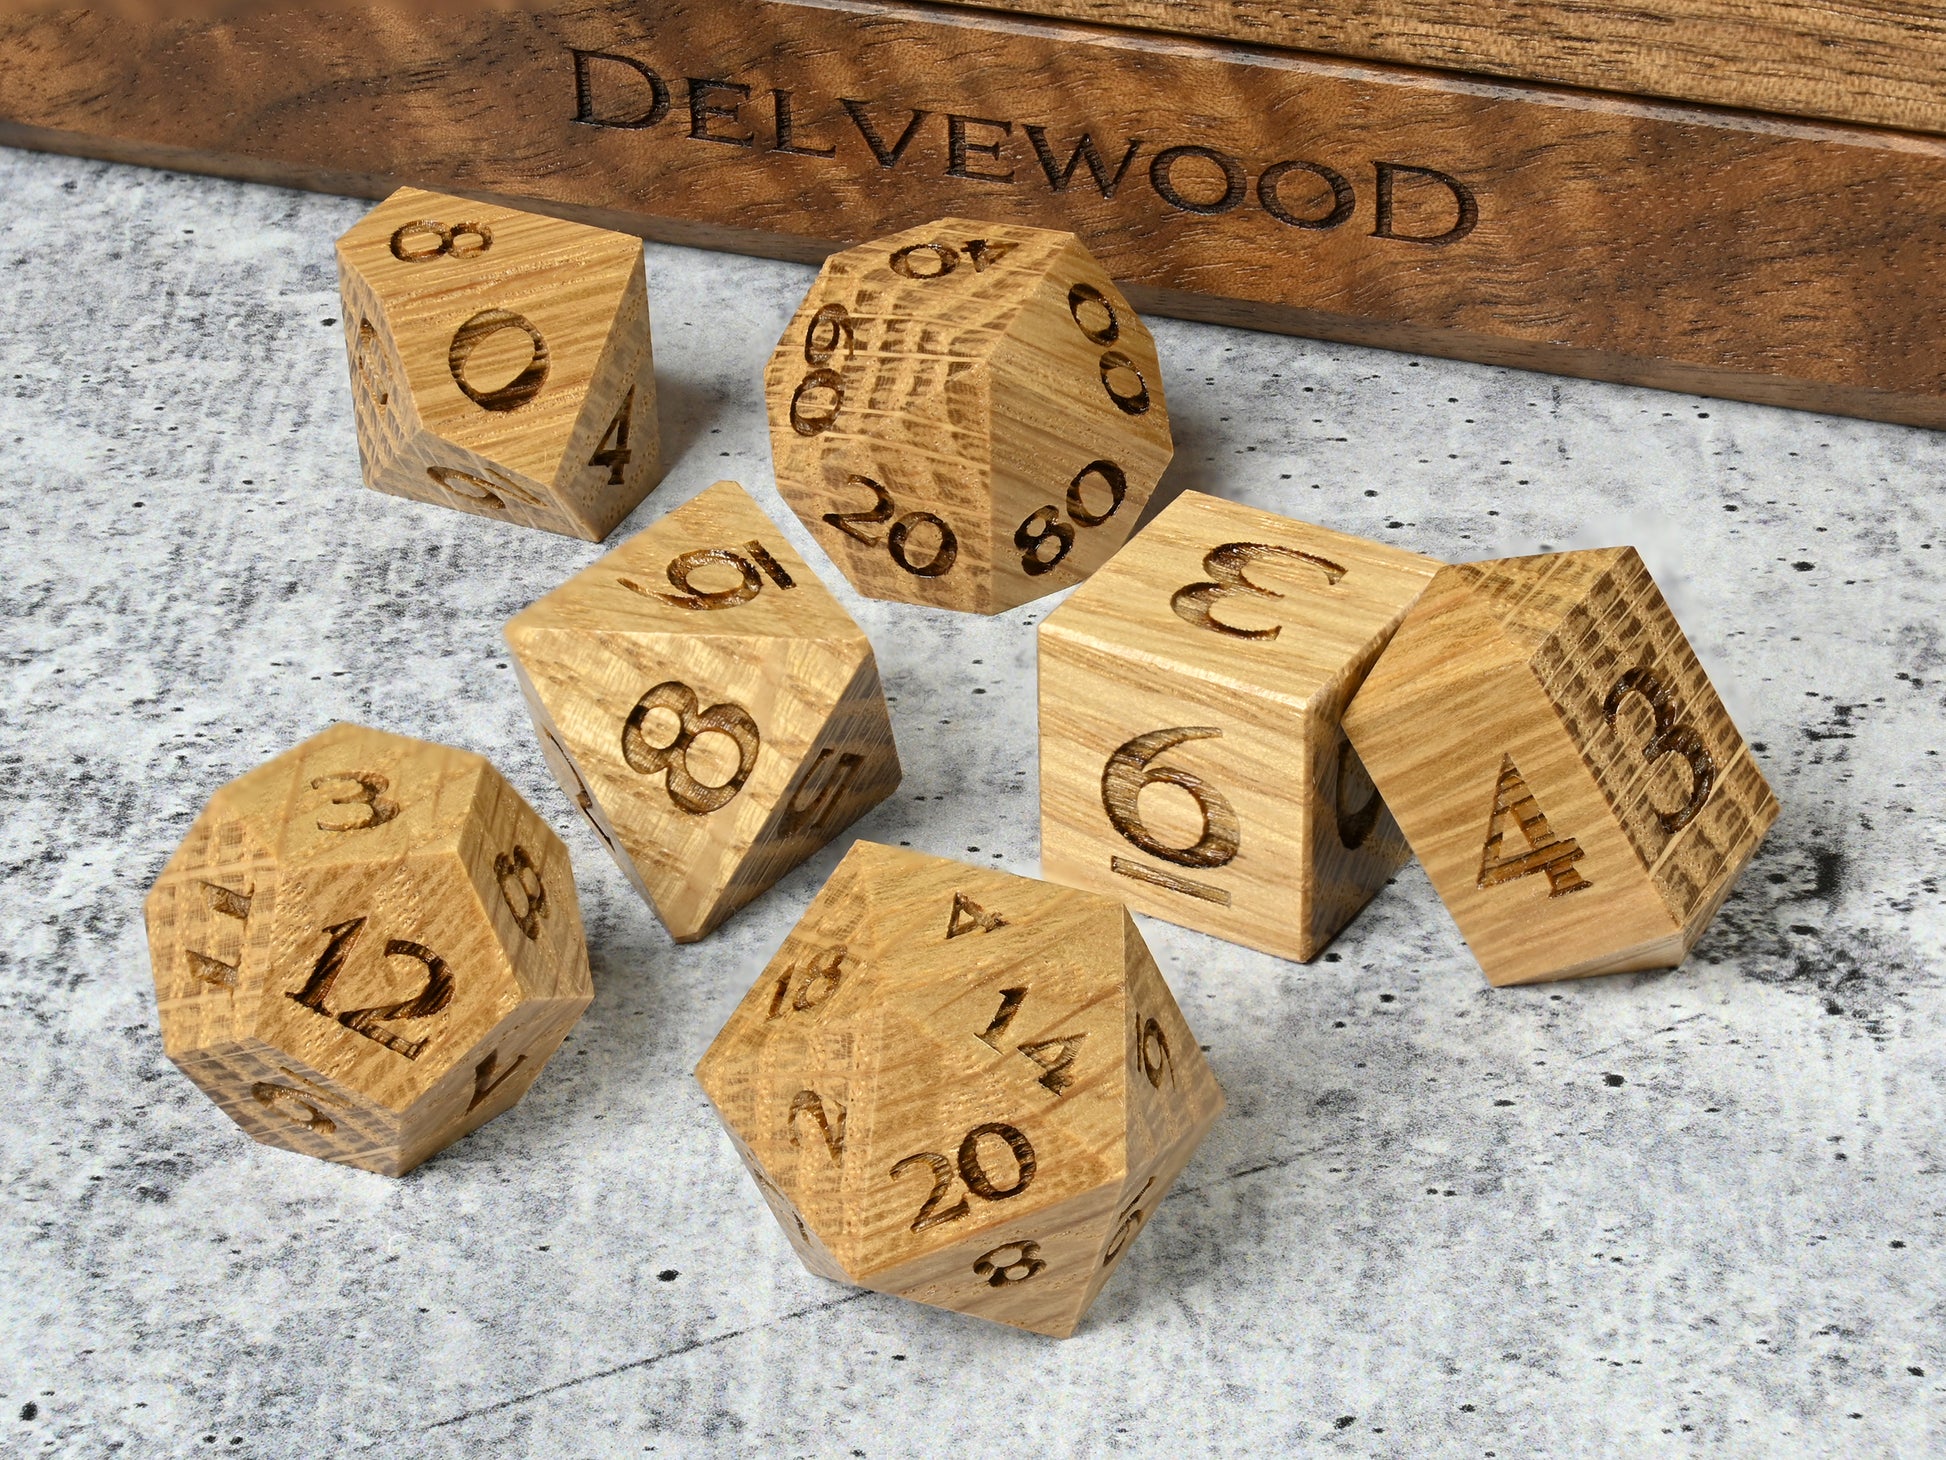 White Oak wood dice set for dnd rpg tabletop gaming in front of Delvewood delver's kit dice box.